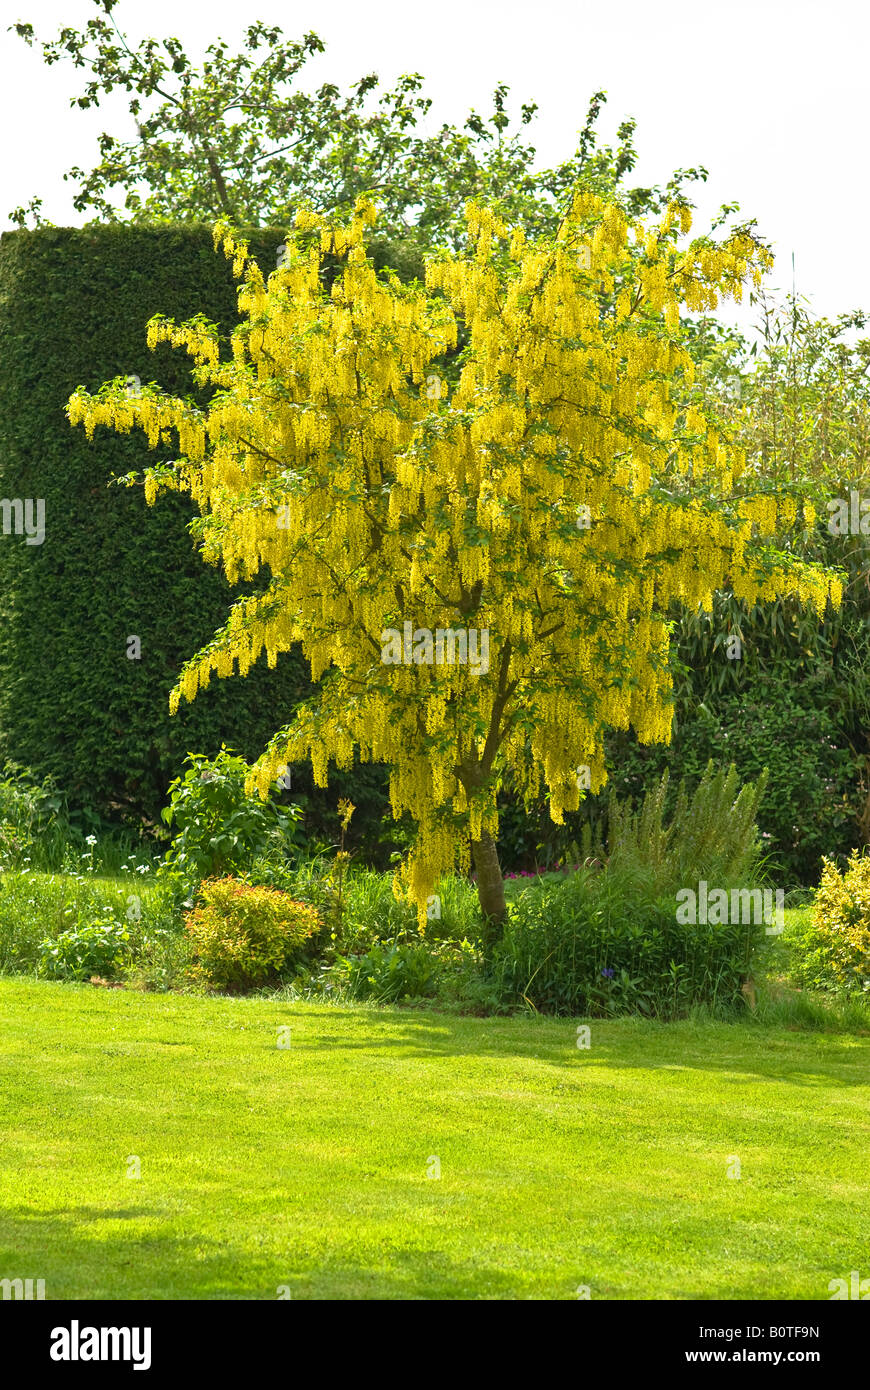 Glorious flowering Laburnum x watereri Vossii in May showing its beauty against darker conifer hedge Stock Photo